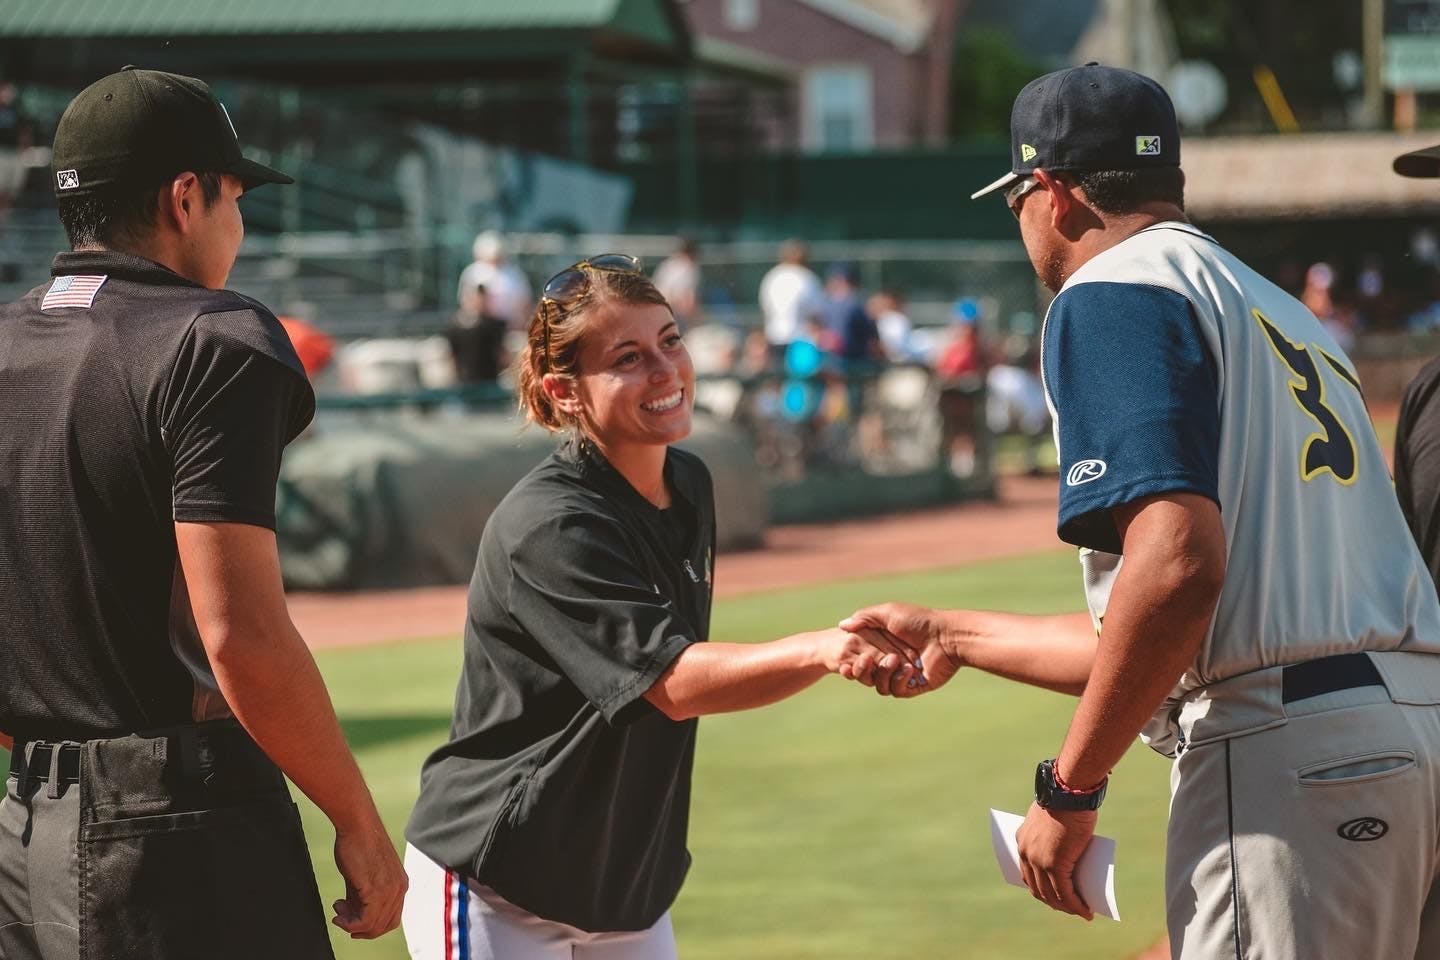 Two UNC softball players broke gender barriers this summer in baseball coaching roles